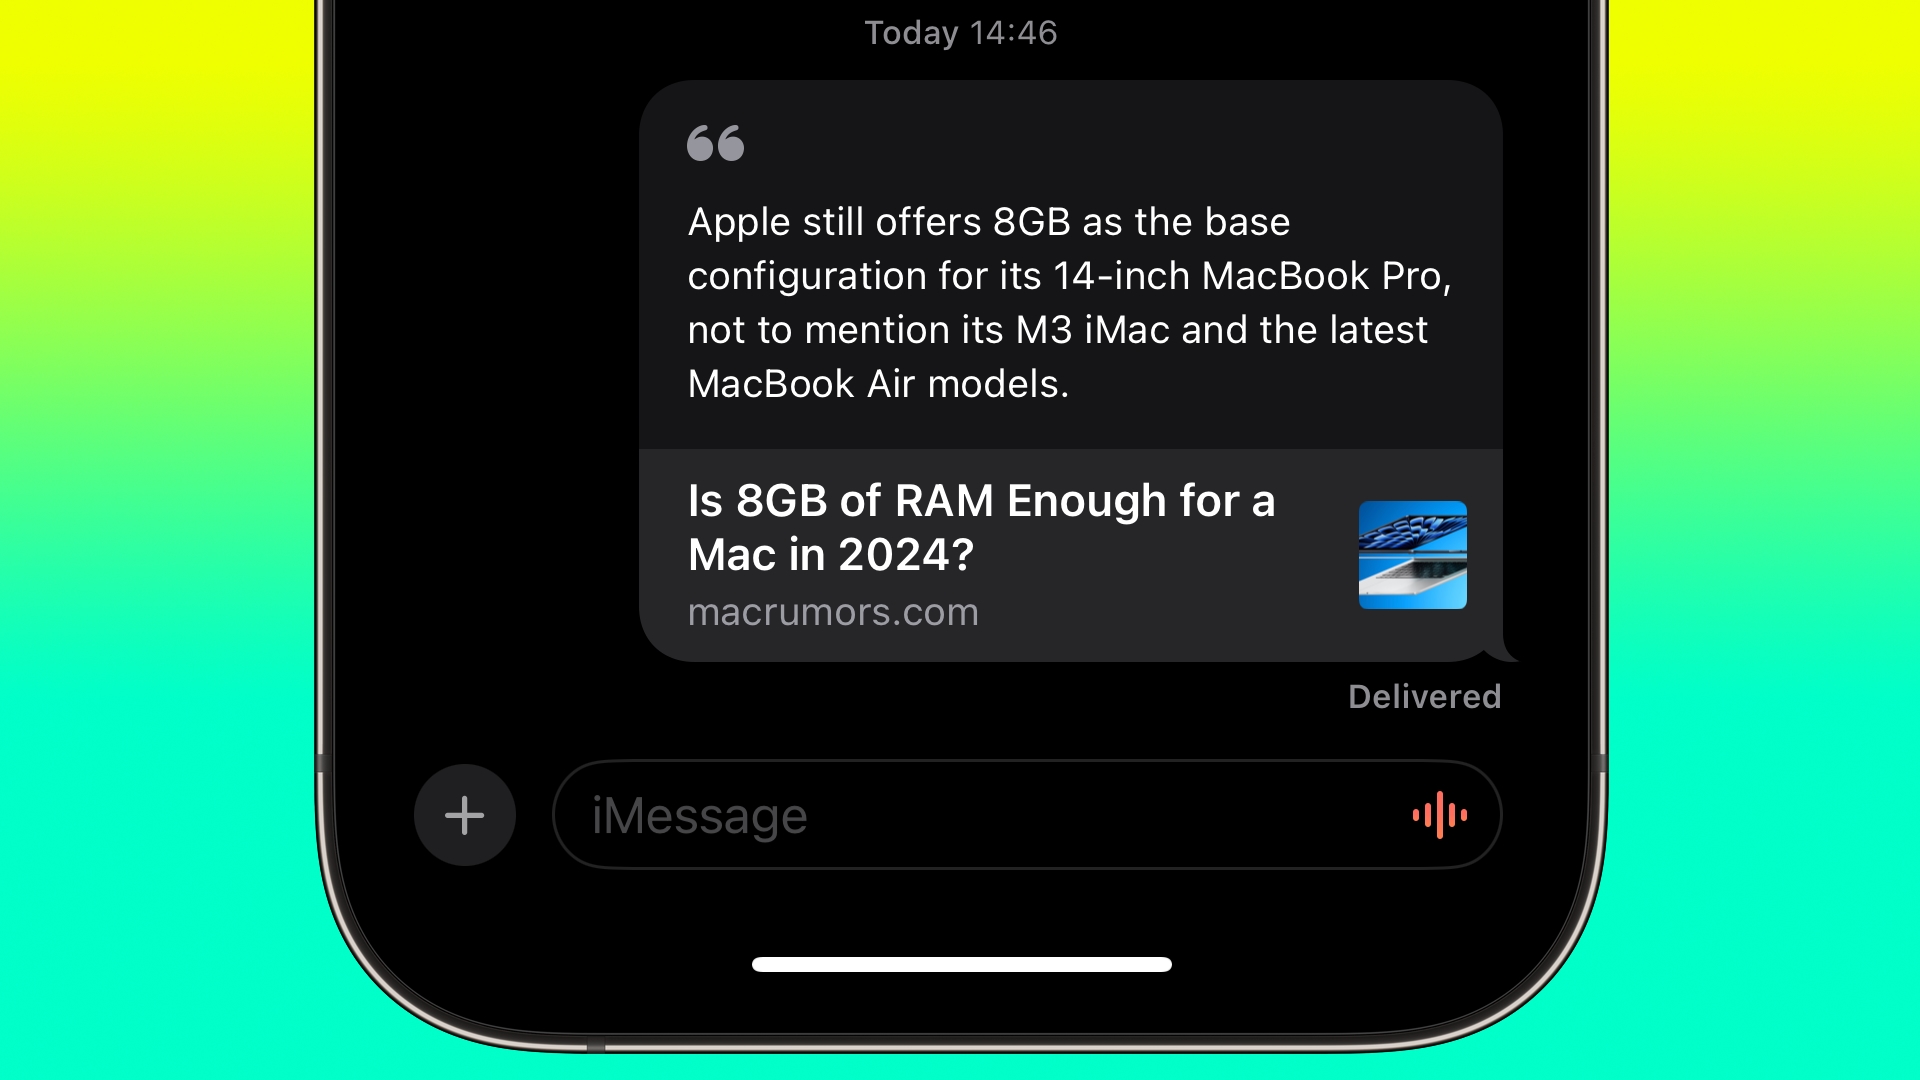 Share a Webpage Link With Quoted Text in iPhone Messages